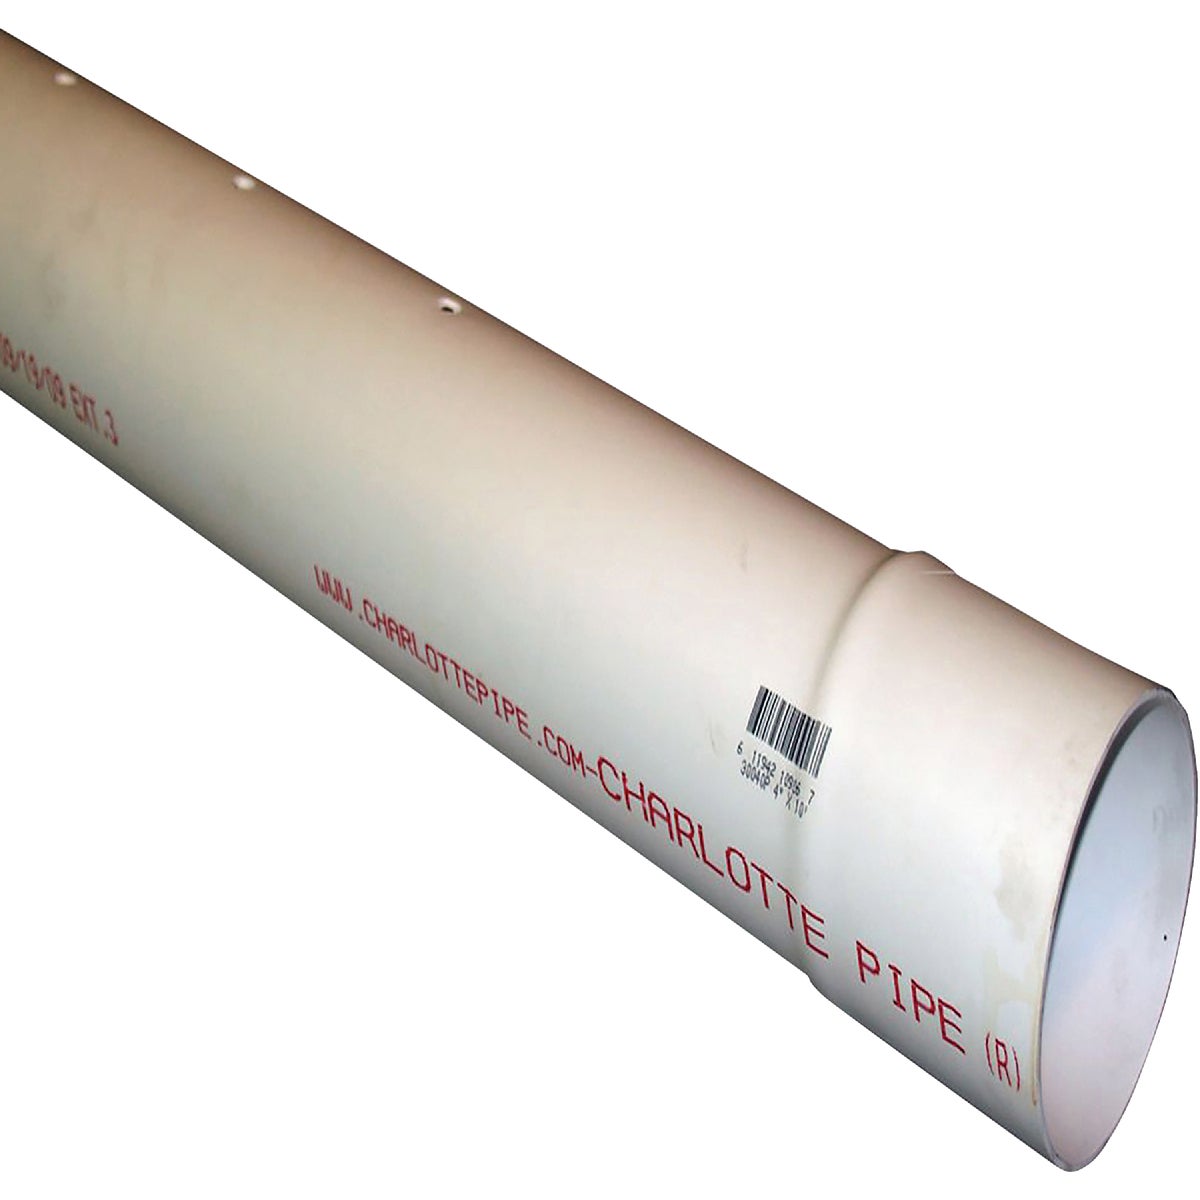 Item 460621, PVC 2729 Sewer Pipe is for sewer and storm drainage applications only.